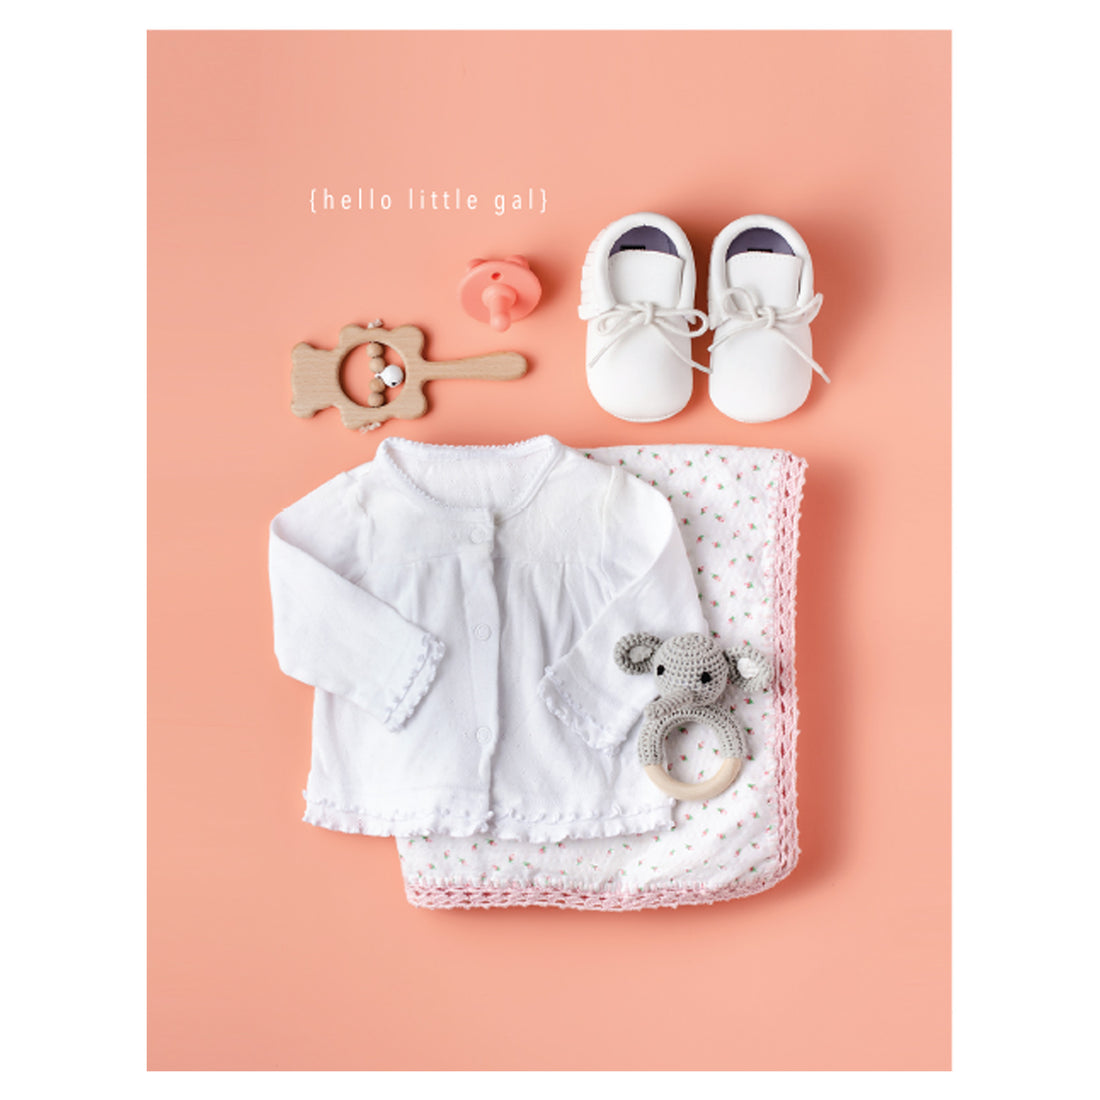 A photo of white and pink baby items including a shirt, folded blanket, shoes, a rattle and a pacifier on a pink background, with &quot;{hello little gal}&quot; printed in white above the toys.